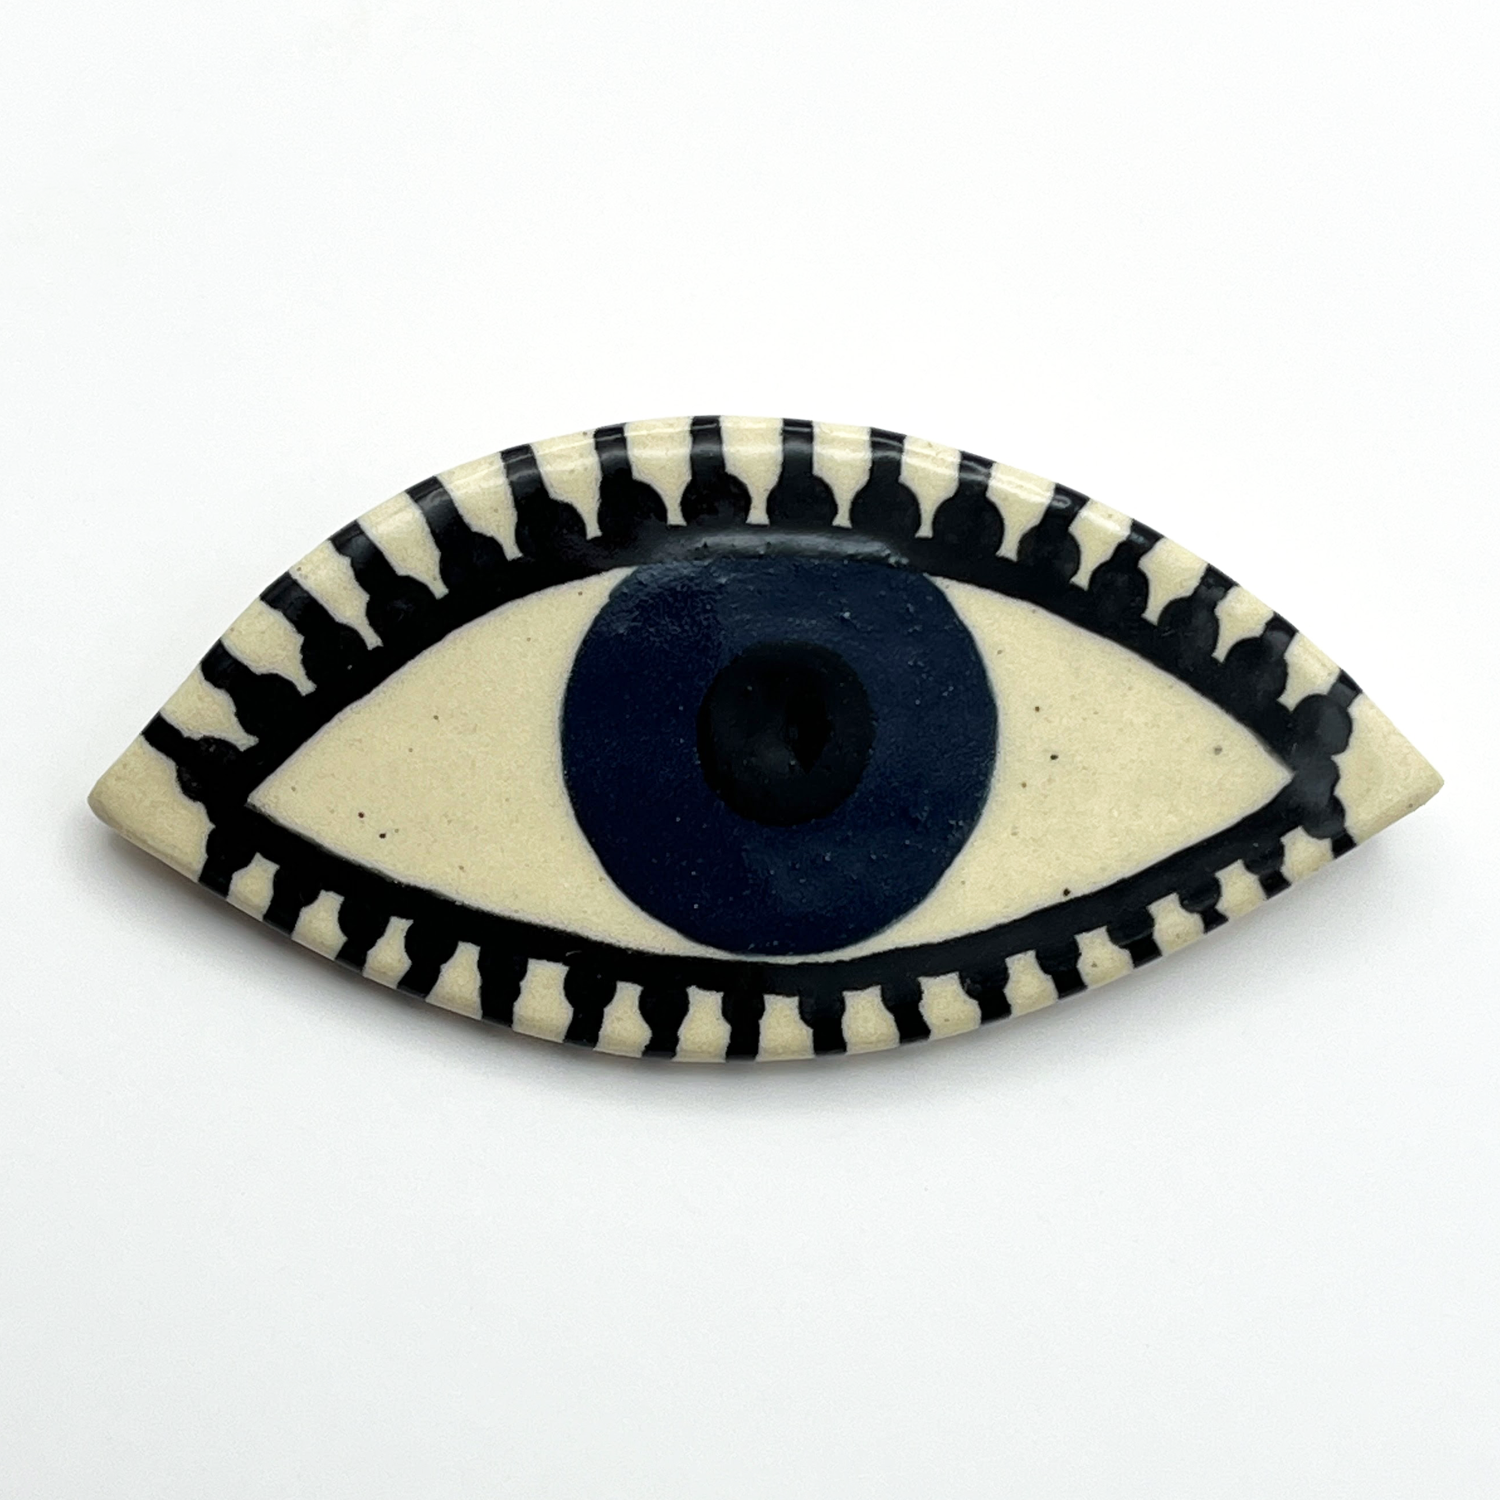 Here and Here: Blue Eye Brooch with Straight Lashes Product Image 1 of 2